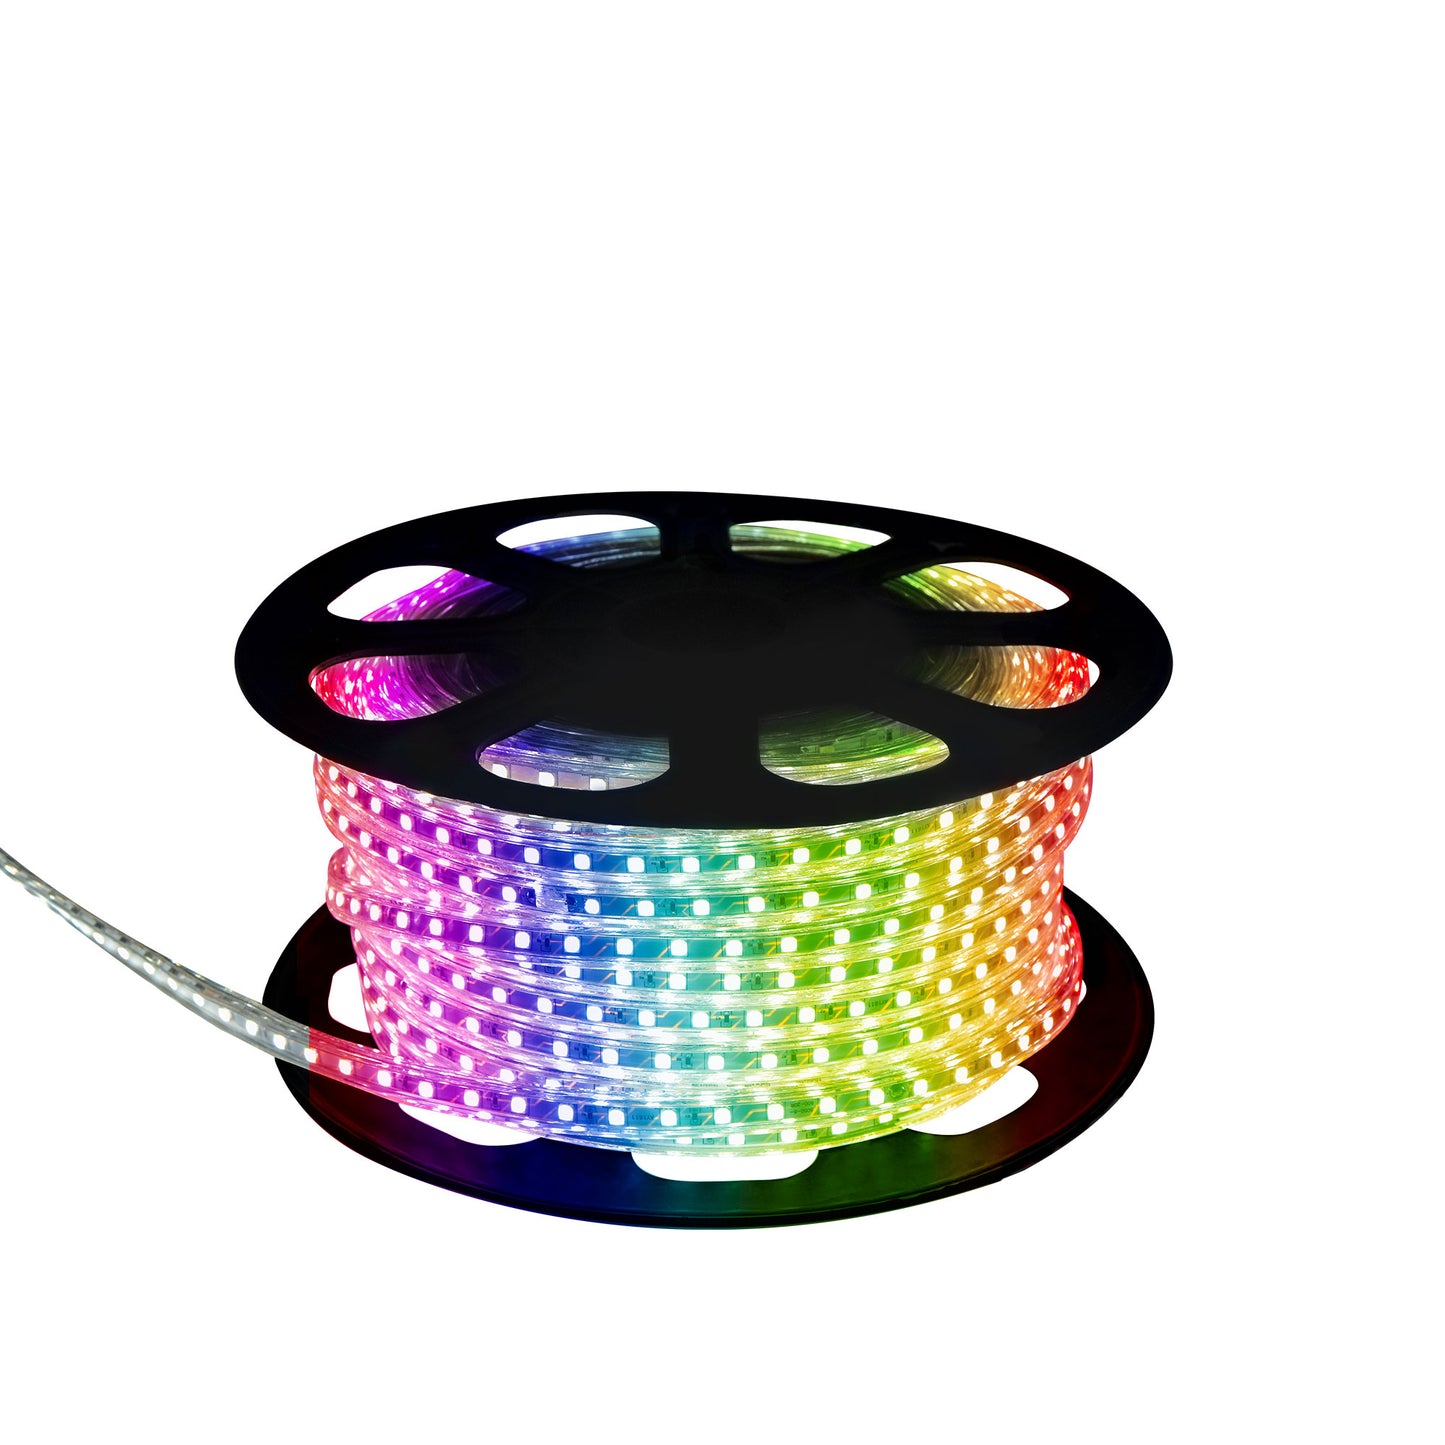 25M LED STRIPS IN SILICONE PREMIUM QUALITY 220V AC IP68 SUBMERGIBLE 